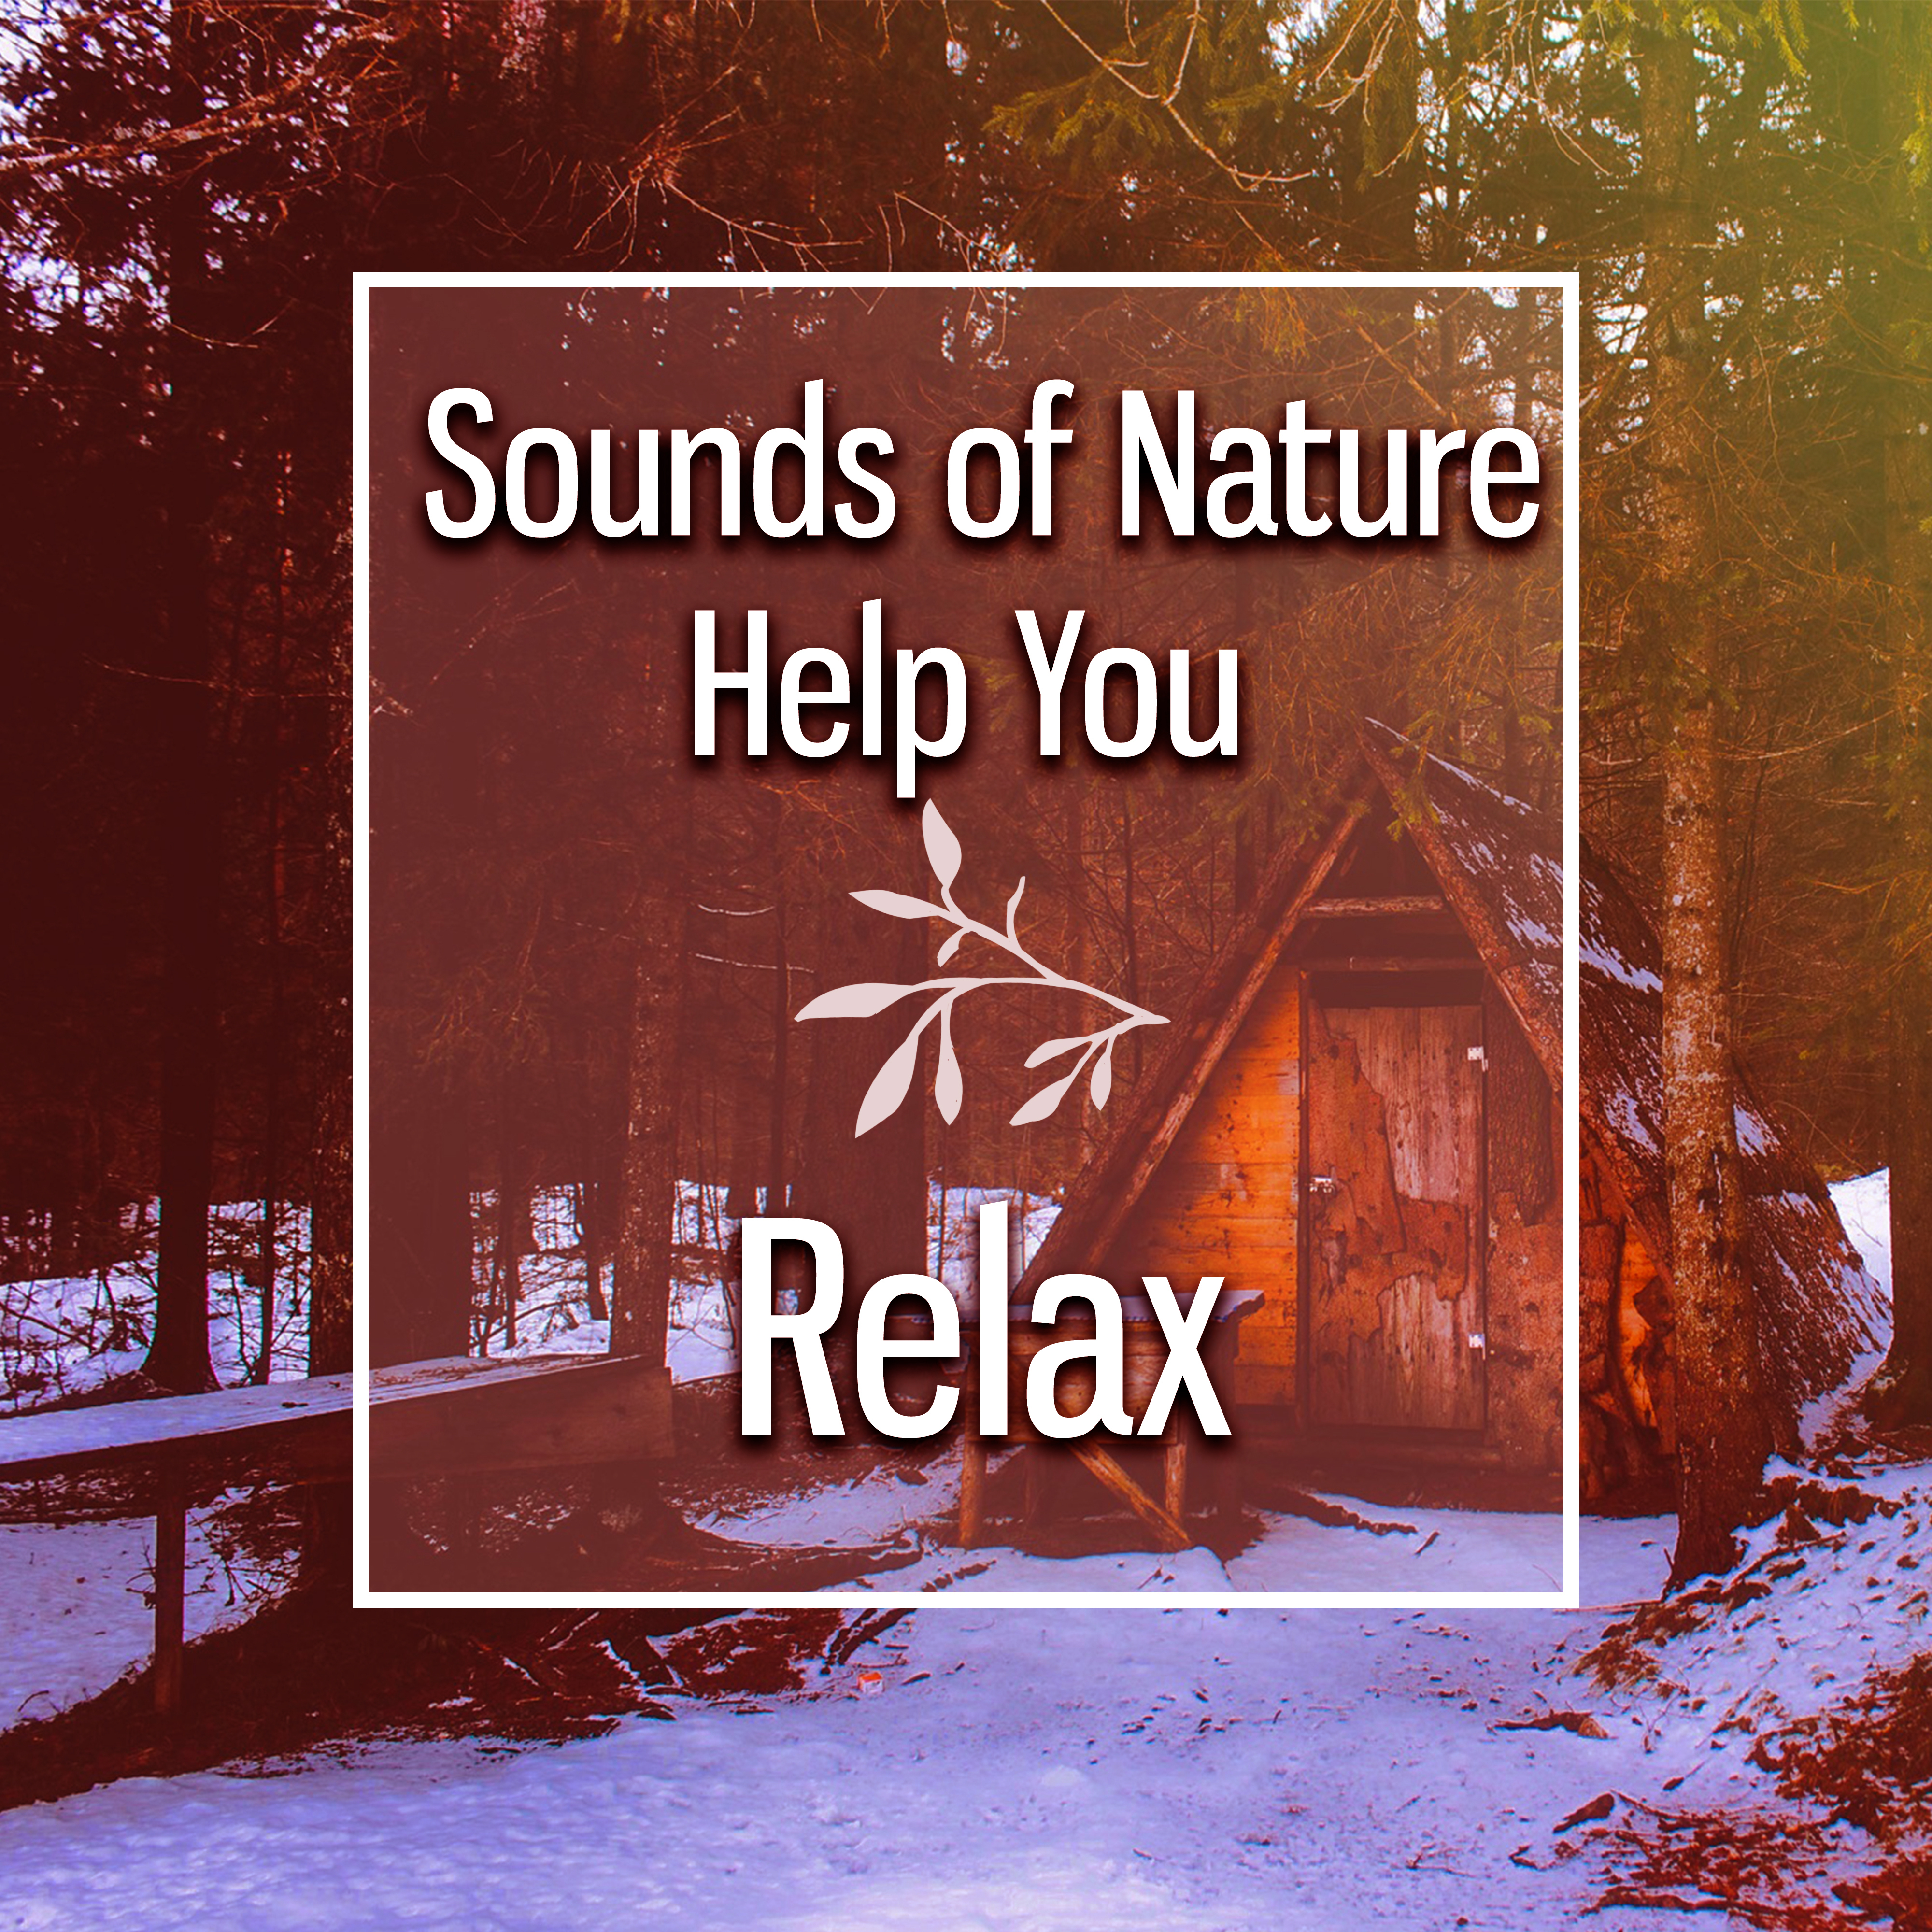 Sounds of Nature Help You Relax – Peaceful Music, Singing Birds, Healing Water, Pure Mind, Rest, Calmness